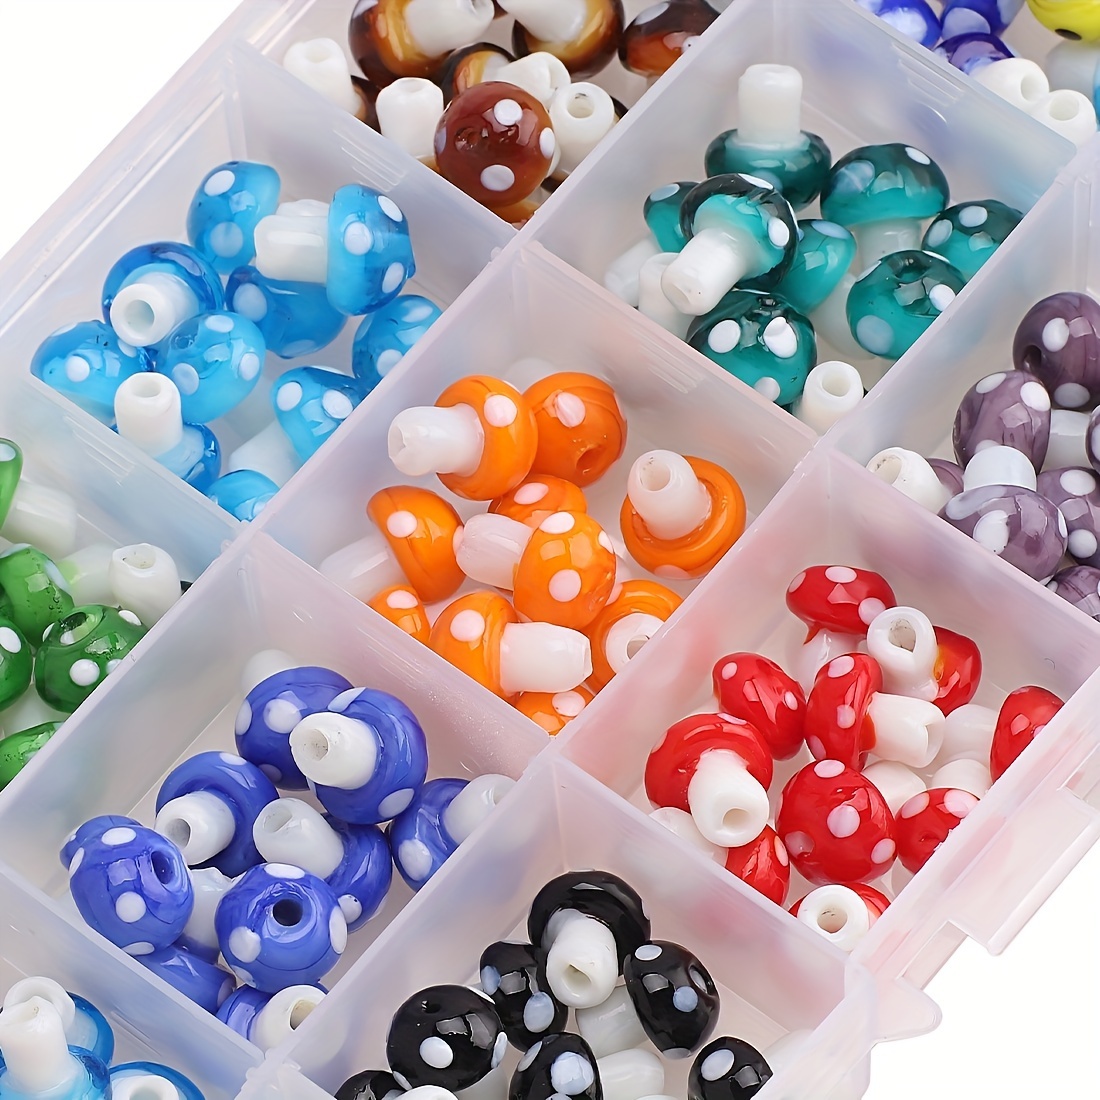 50Pcs Mushroom Beads Charms Glass Lampwork Beads Mushroom Ornament for  Jewelry Craft Necklace Bracelet Earring Making Multicolored